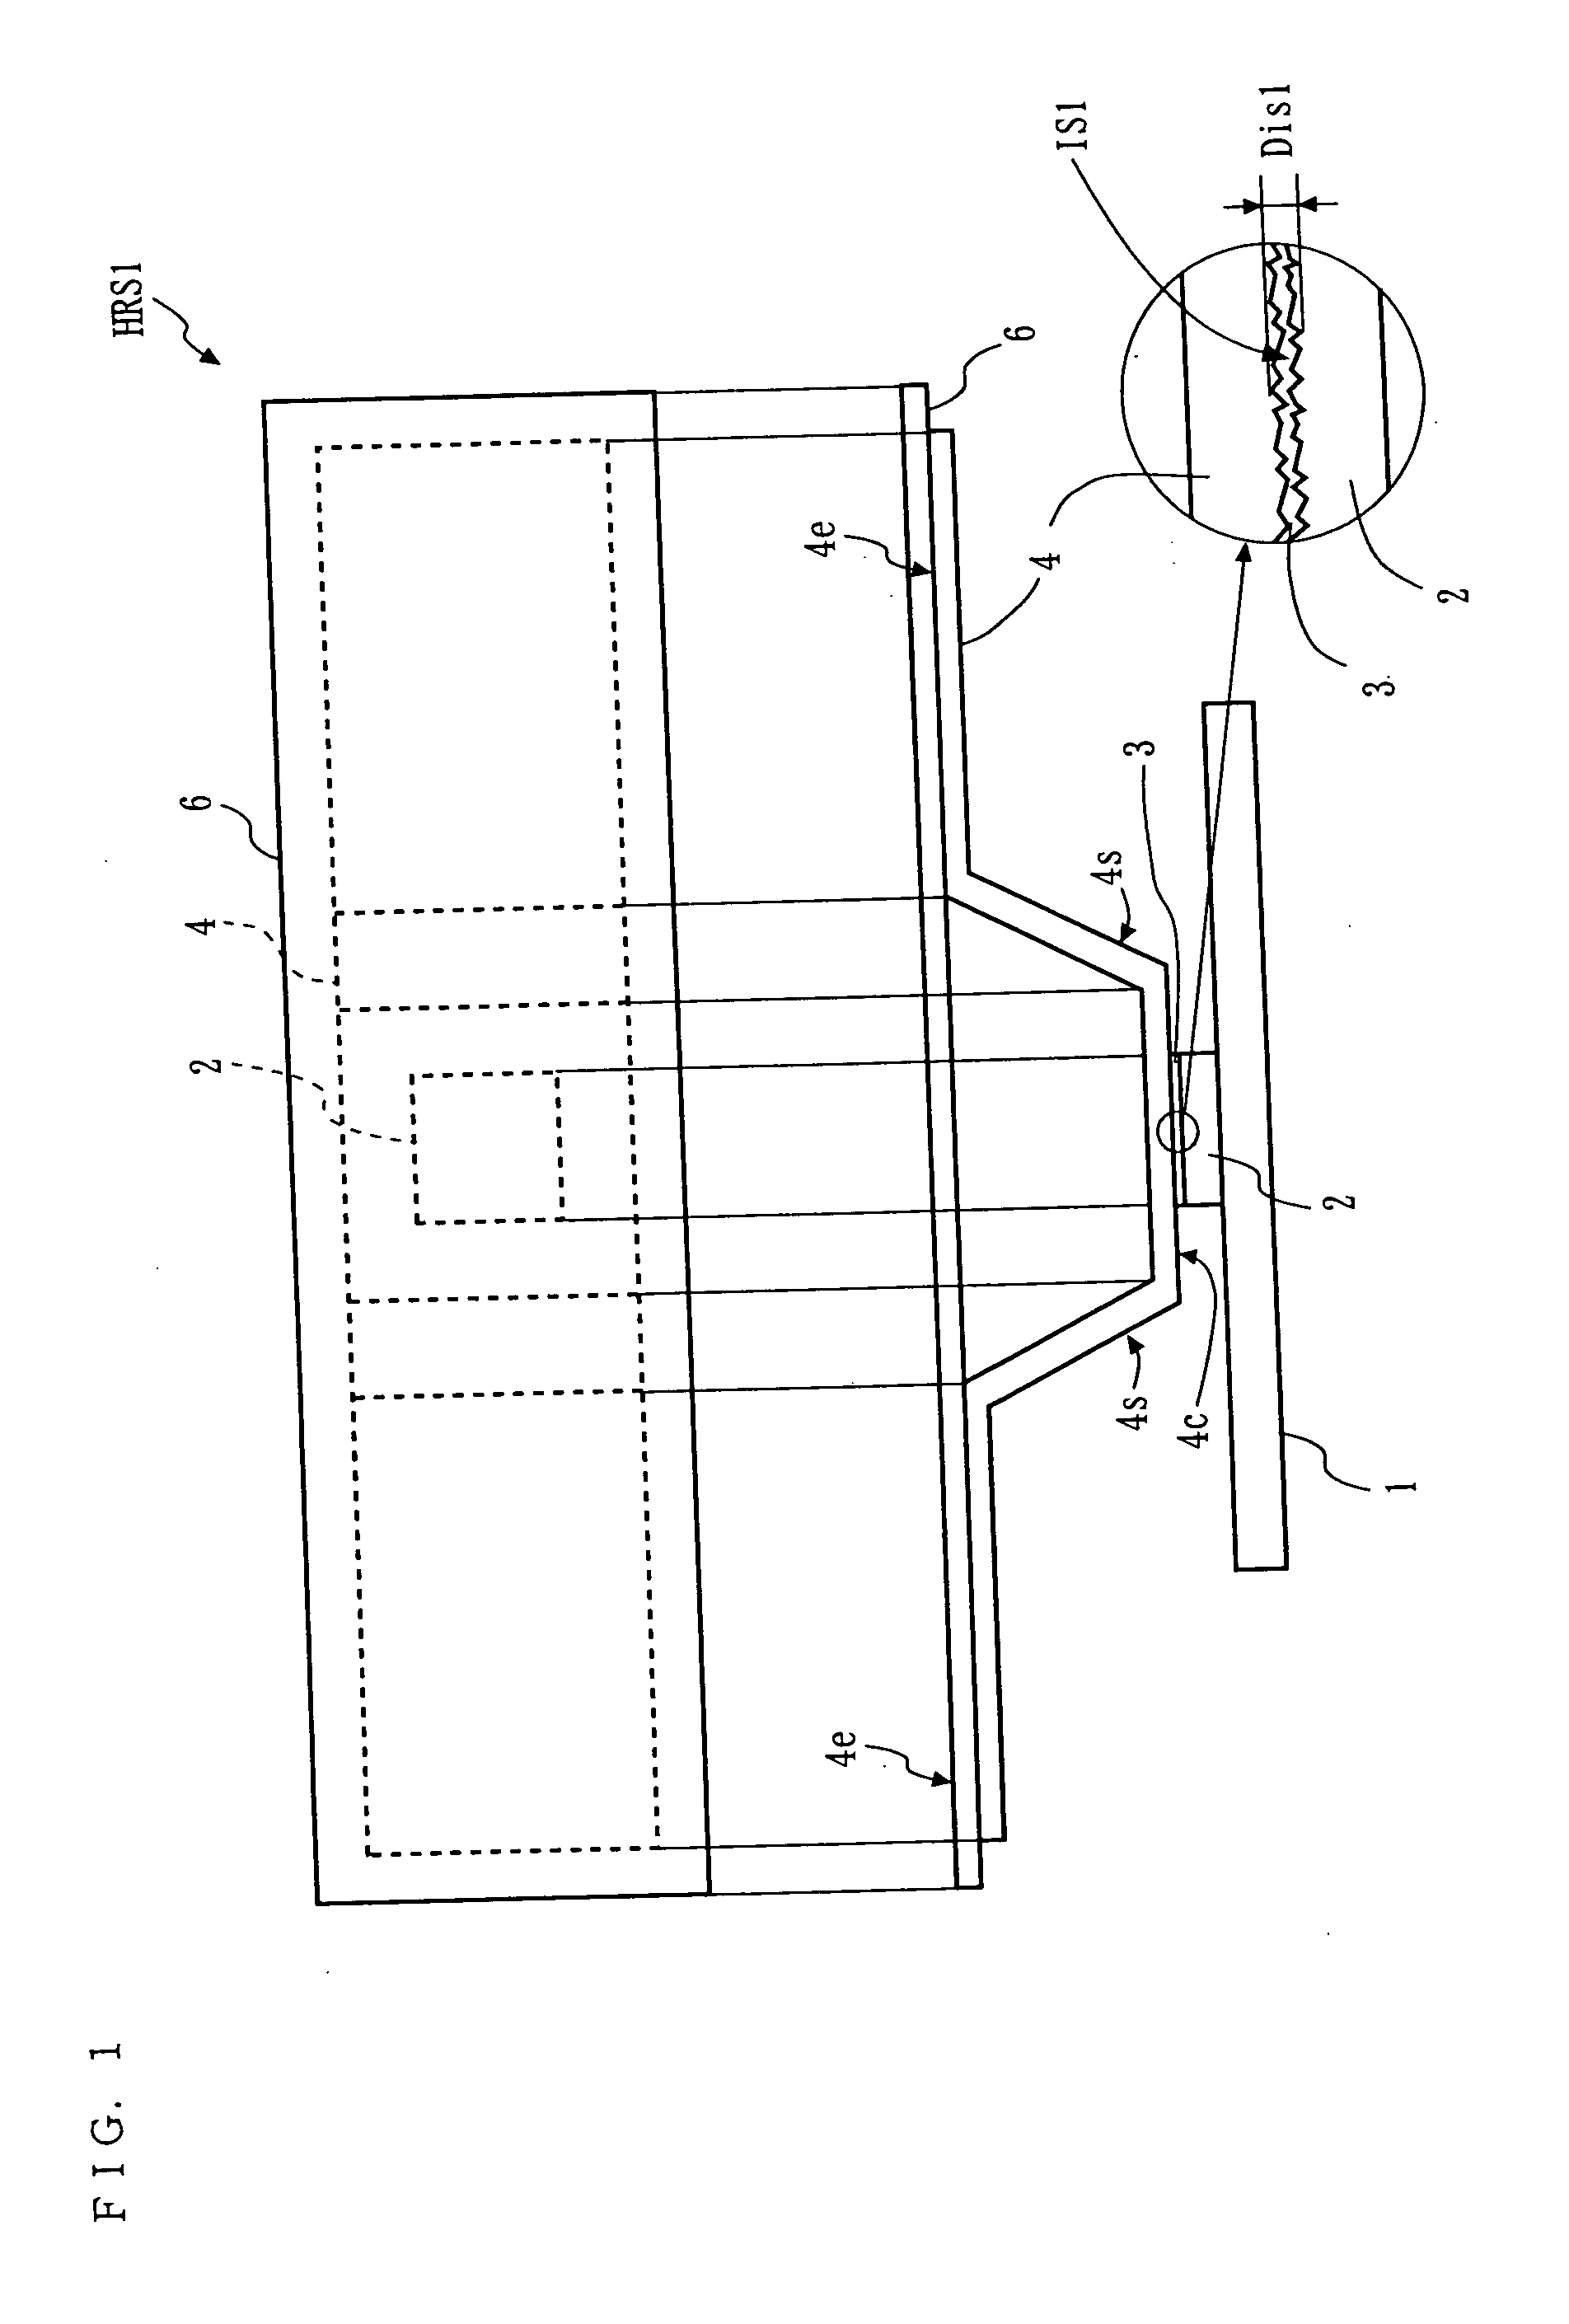 Heat-radiating structure of electronic apparatus